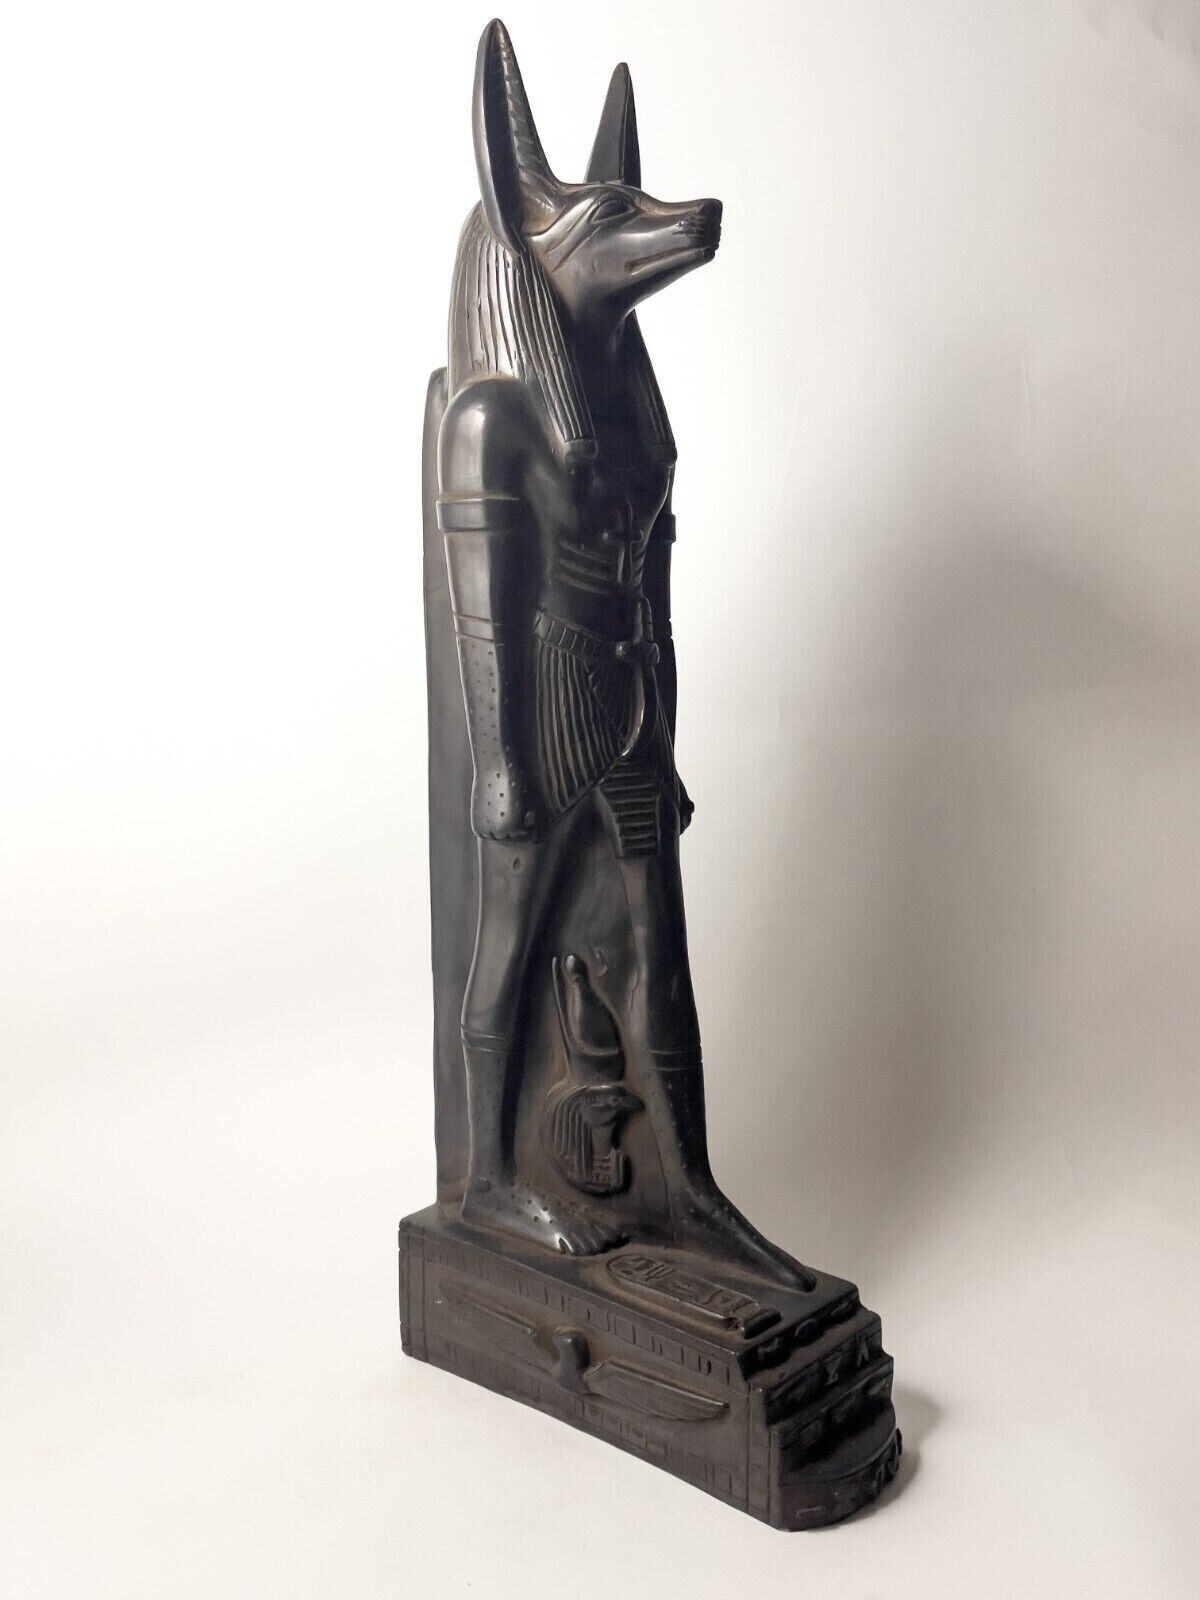 Handmade God Anubis Statue , Large Statuette from Basalt Stone - Ancient Egypt